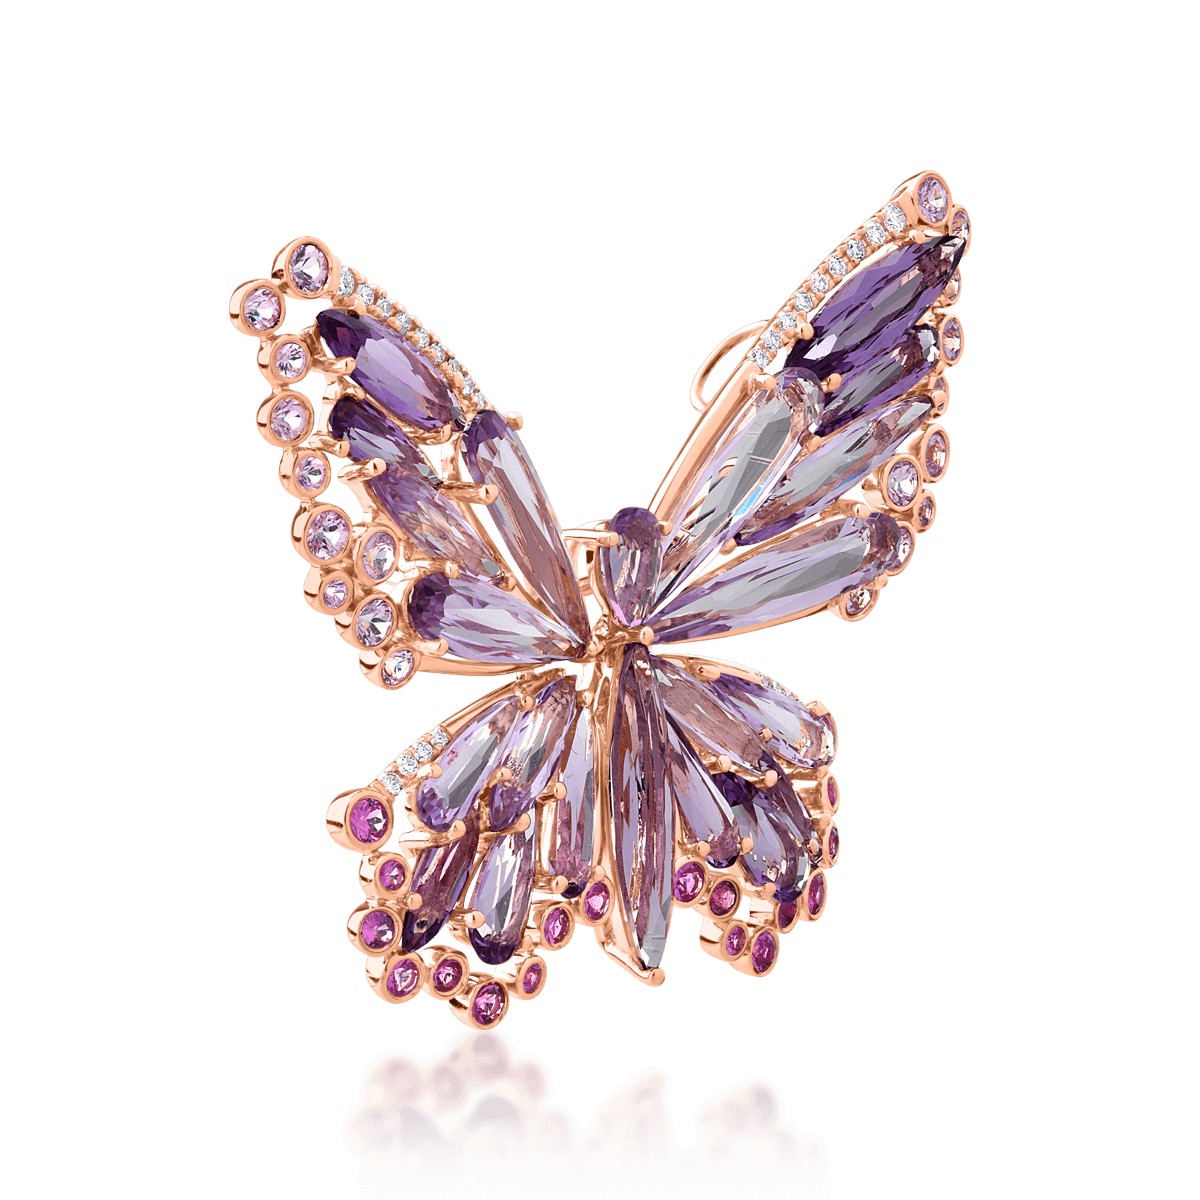 18K rose gold brooch with 11.1ct precious and semi-precious stones